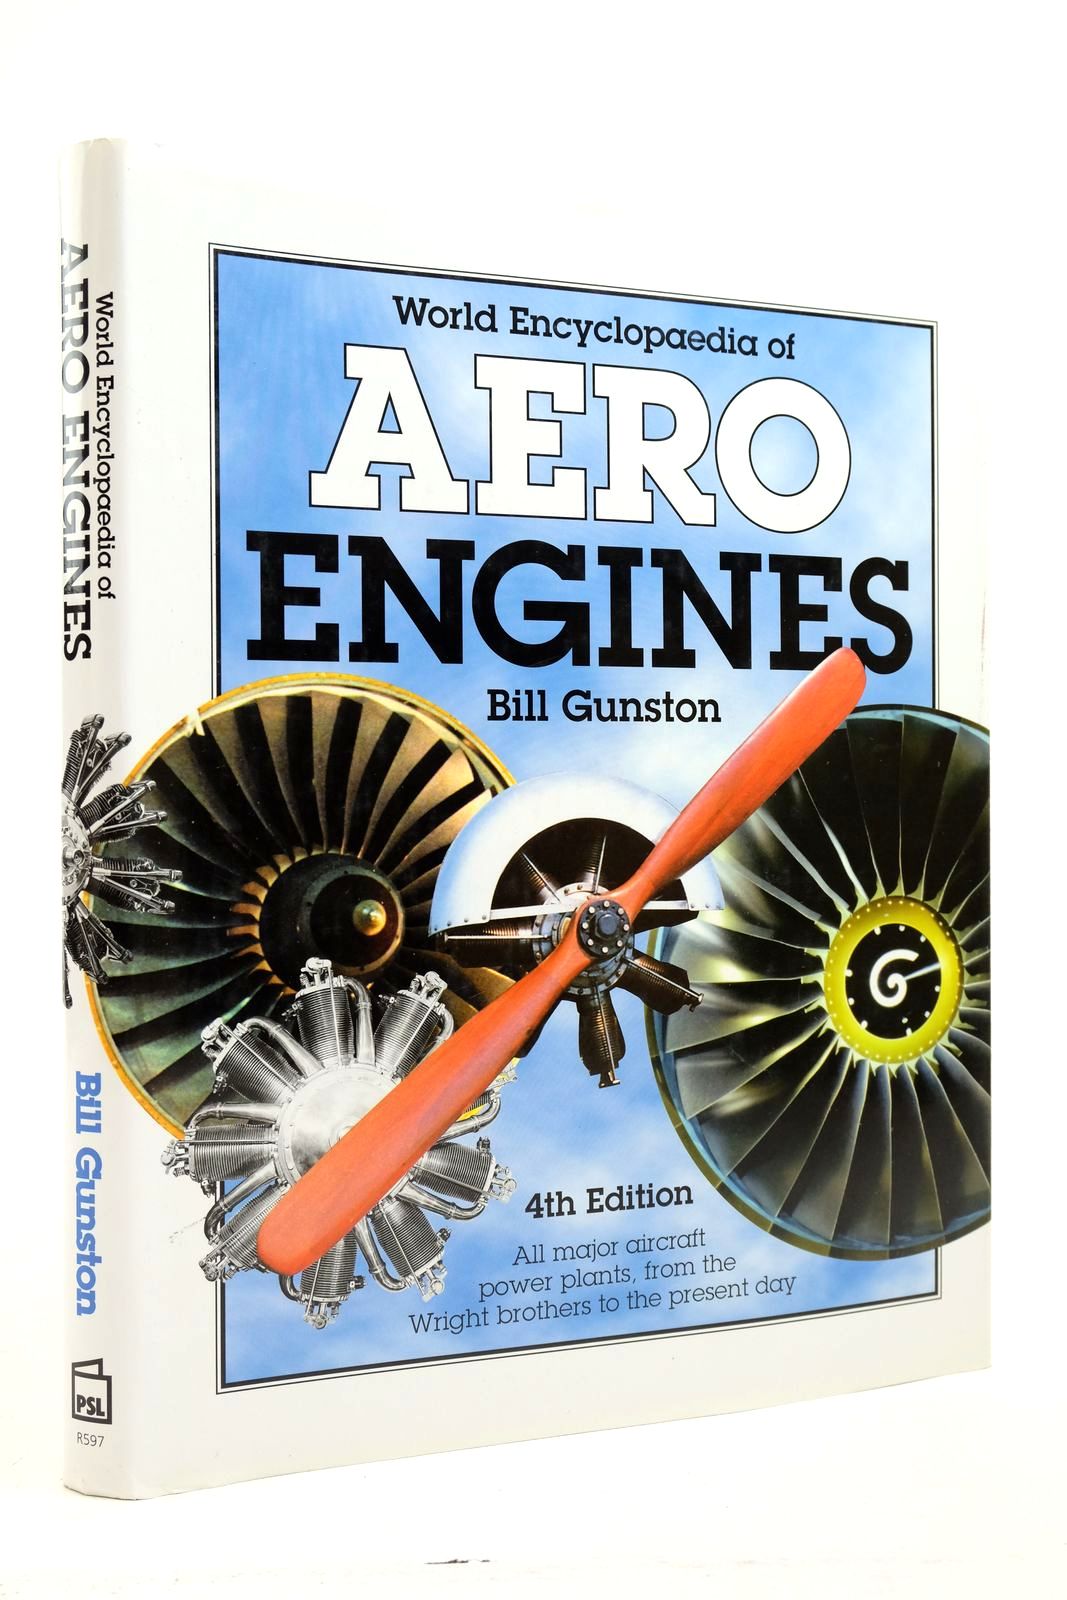 Photo of WORLD ENCYCLOPAEDIA OF AERO ENGINES written by Gunston, Bill published by Patrick Stephens Limited (STOCK CODE: 2139578)  for sale by Stella & Rose's Books